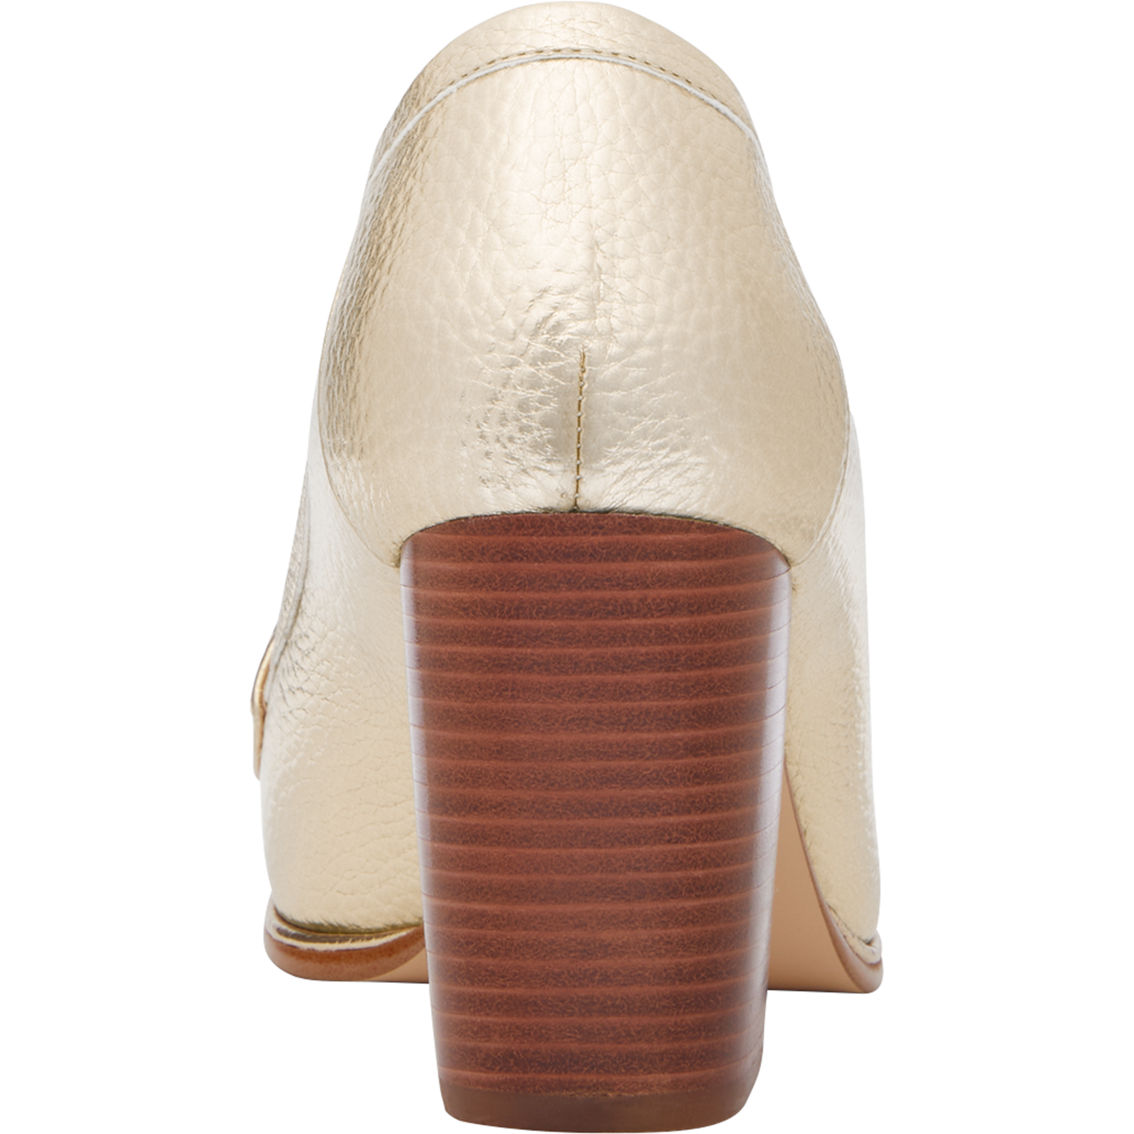 Michael Kors Rory Heeled Loafers - Image 3 of 3